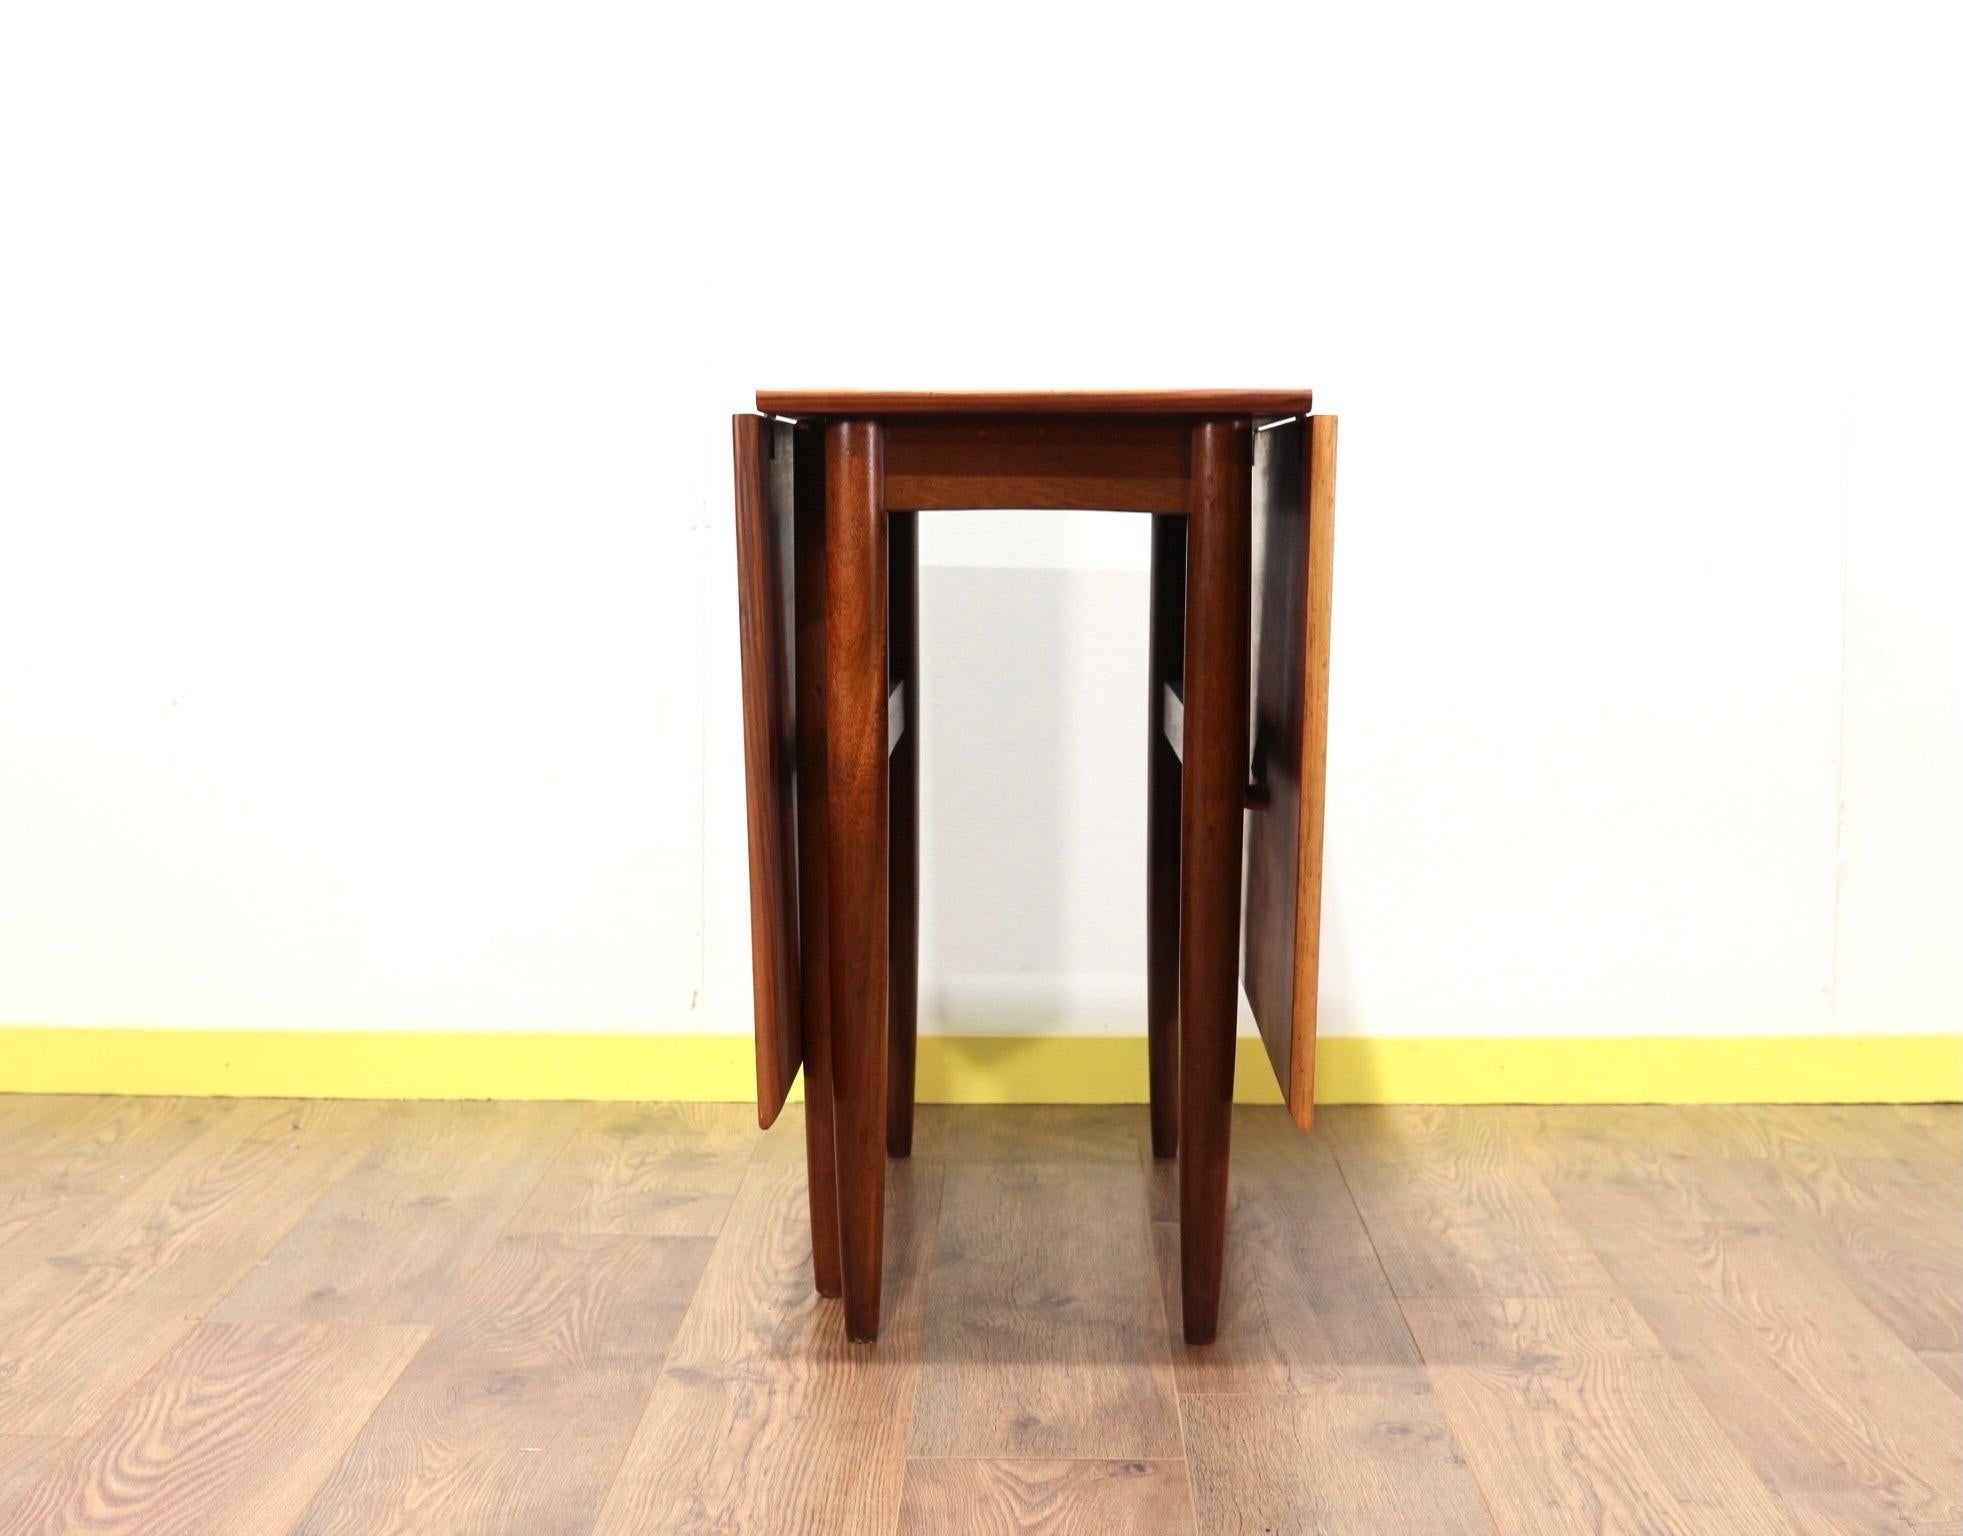 A beautiful mid century folding gate leg table by British furniture maker Morris of Glasgow. A gorgeous grain gives this table a stunning look. It can fit into tight spaces when not needed and then folded out with either one or two flaps extended